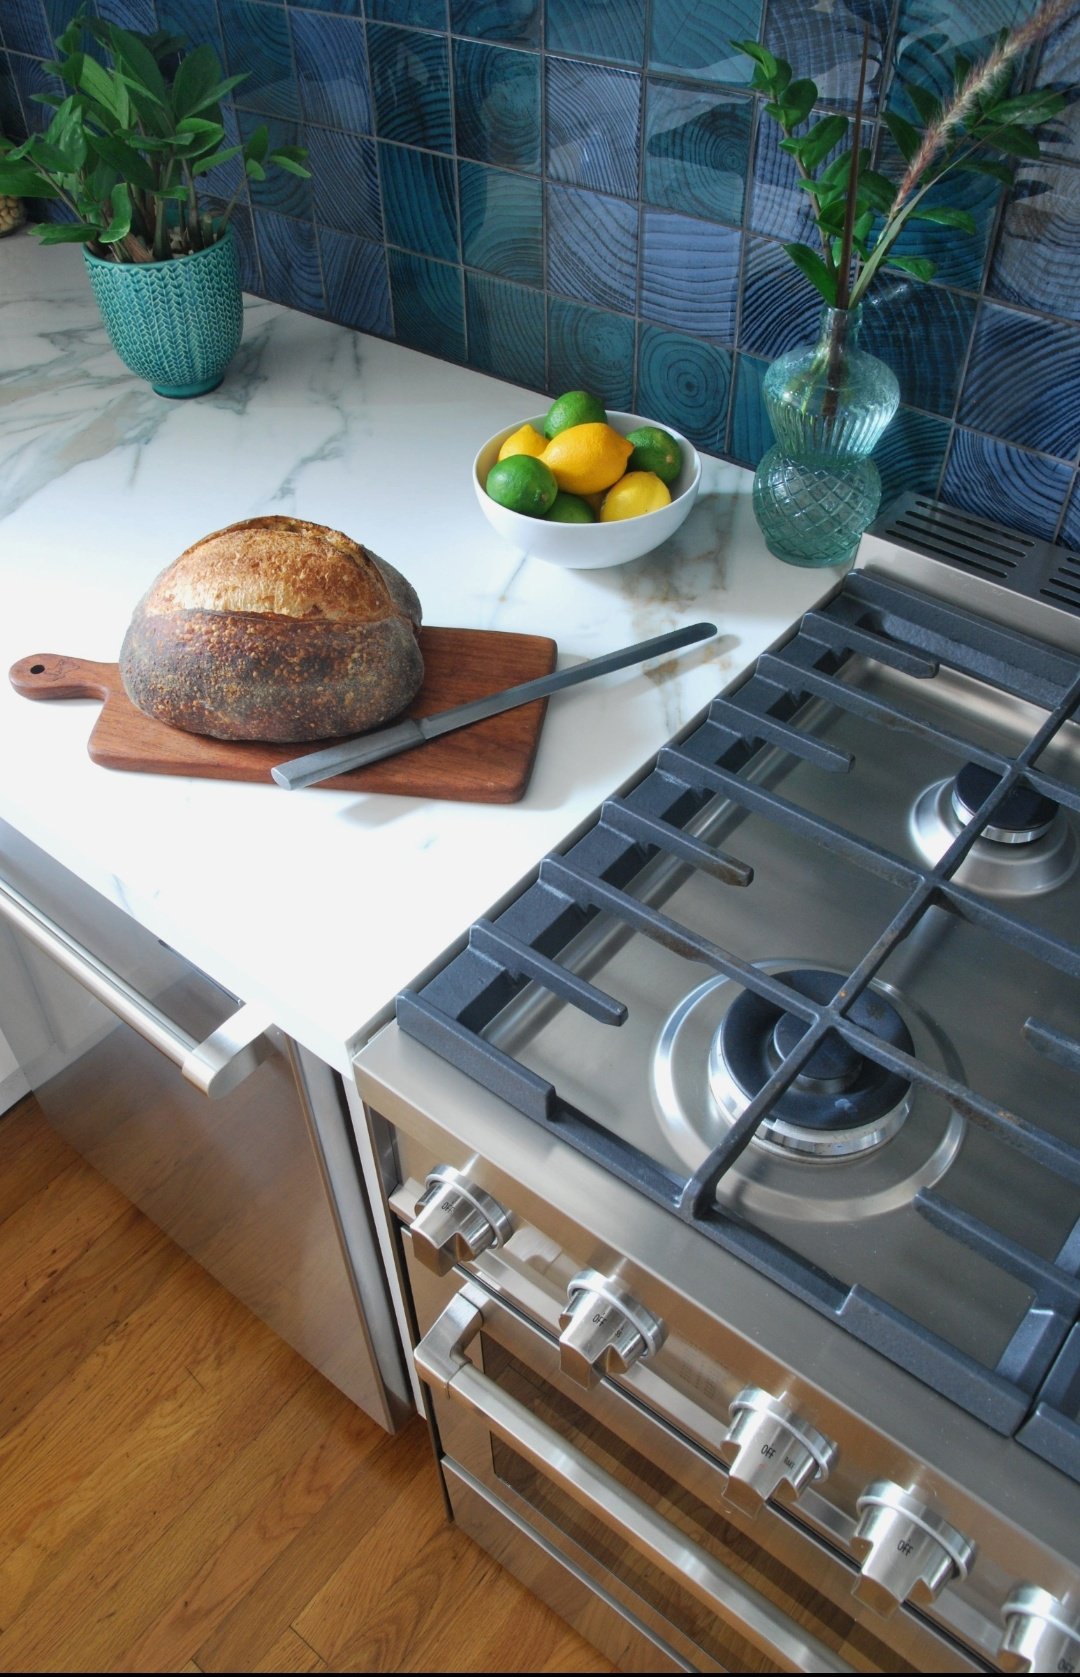 Verona stainless steel range is easy to wipe clean - on The Pillow Goddess blog